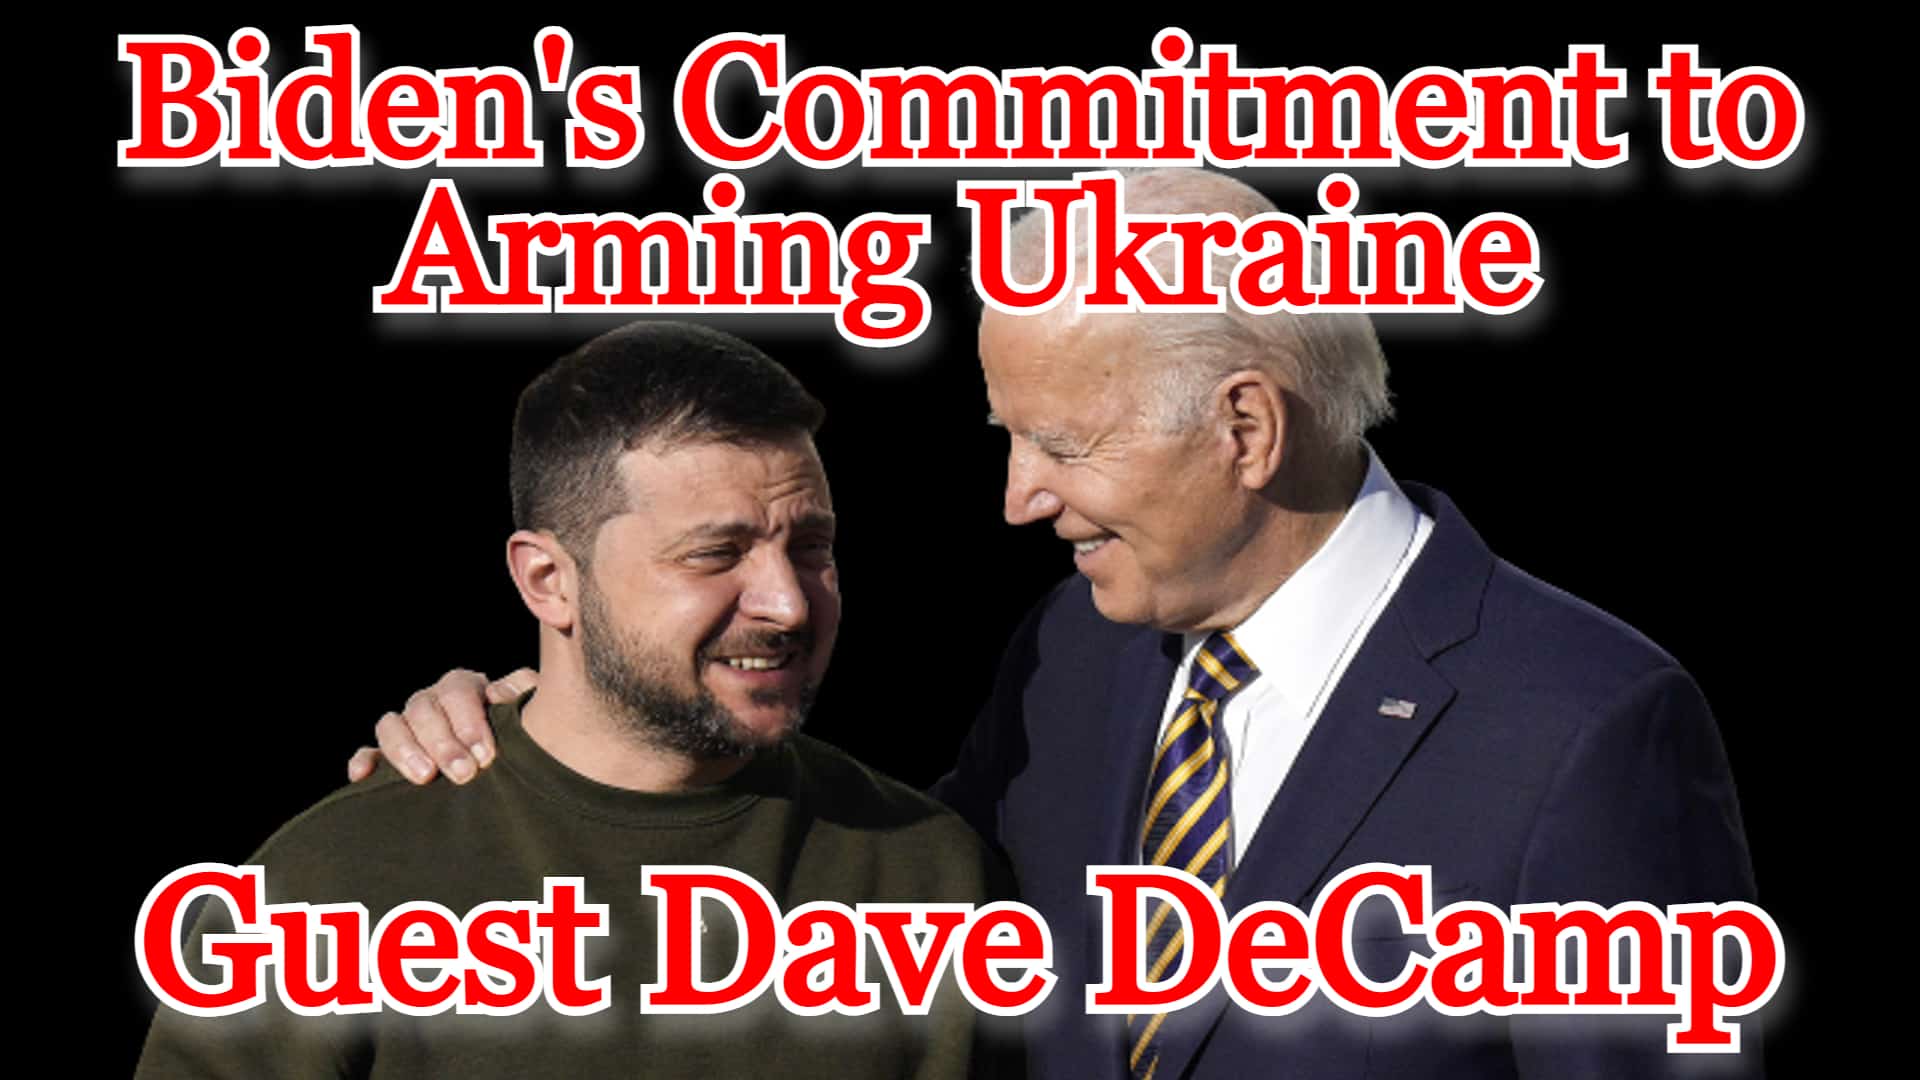 COI #434: Dave DeCamp on Biden’s Commitment to Arming Ukraine